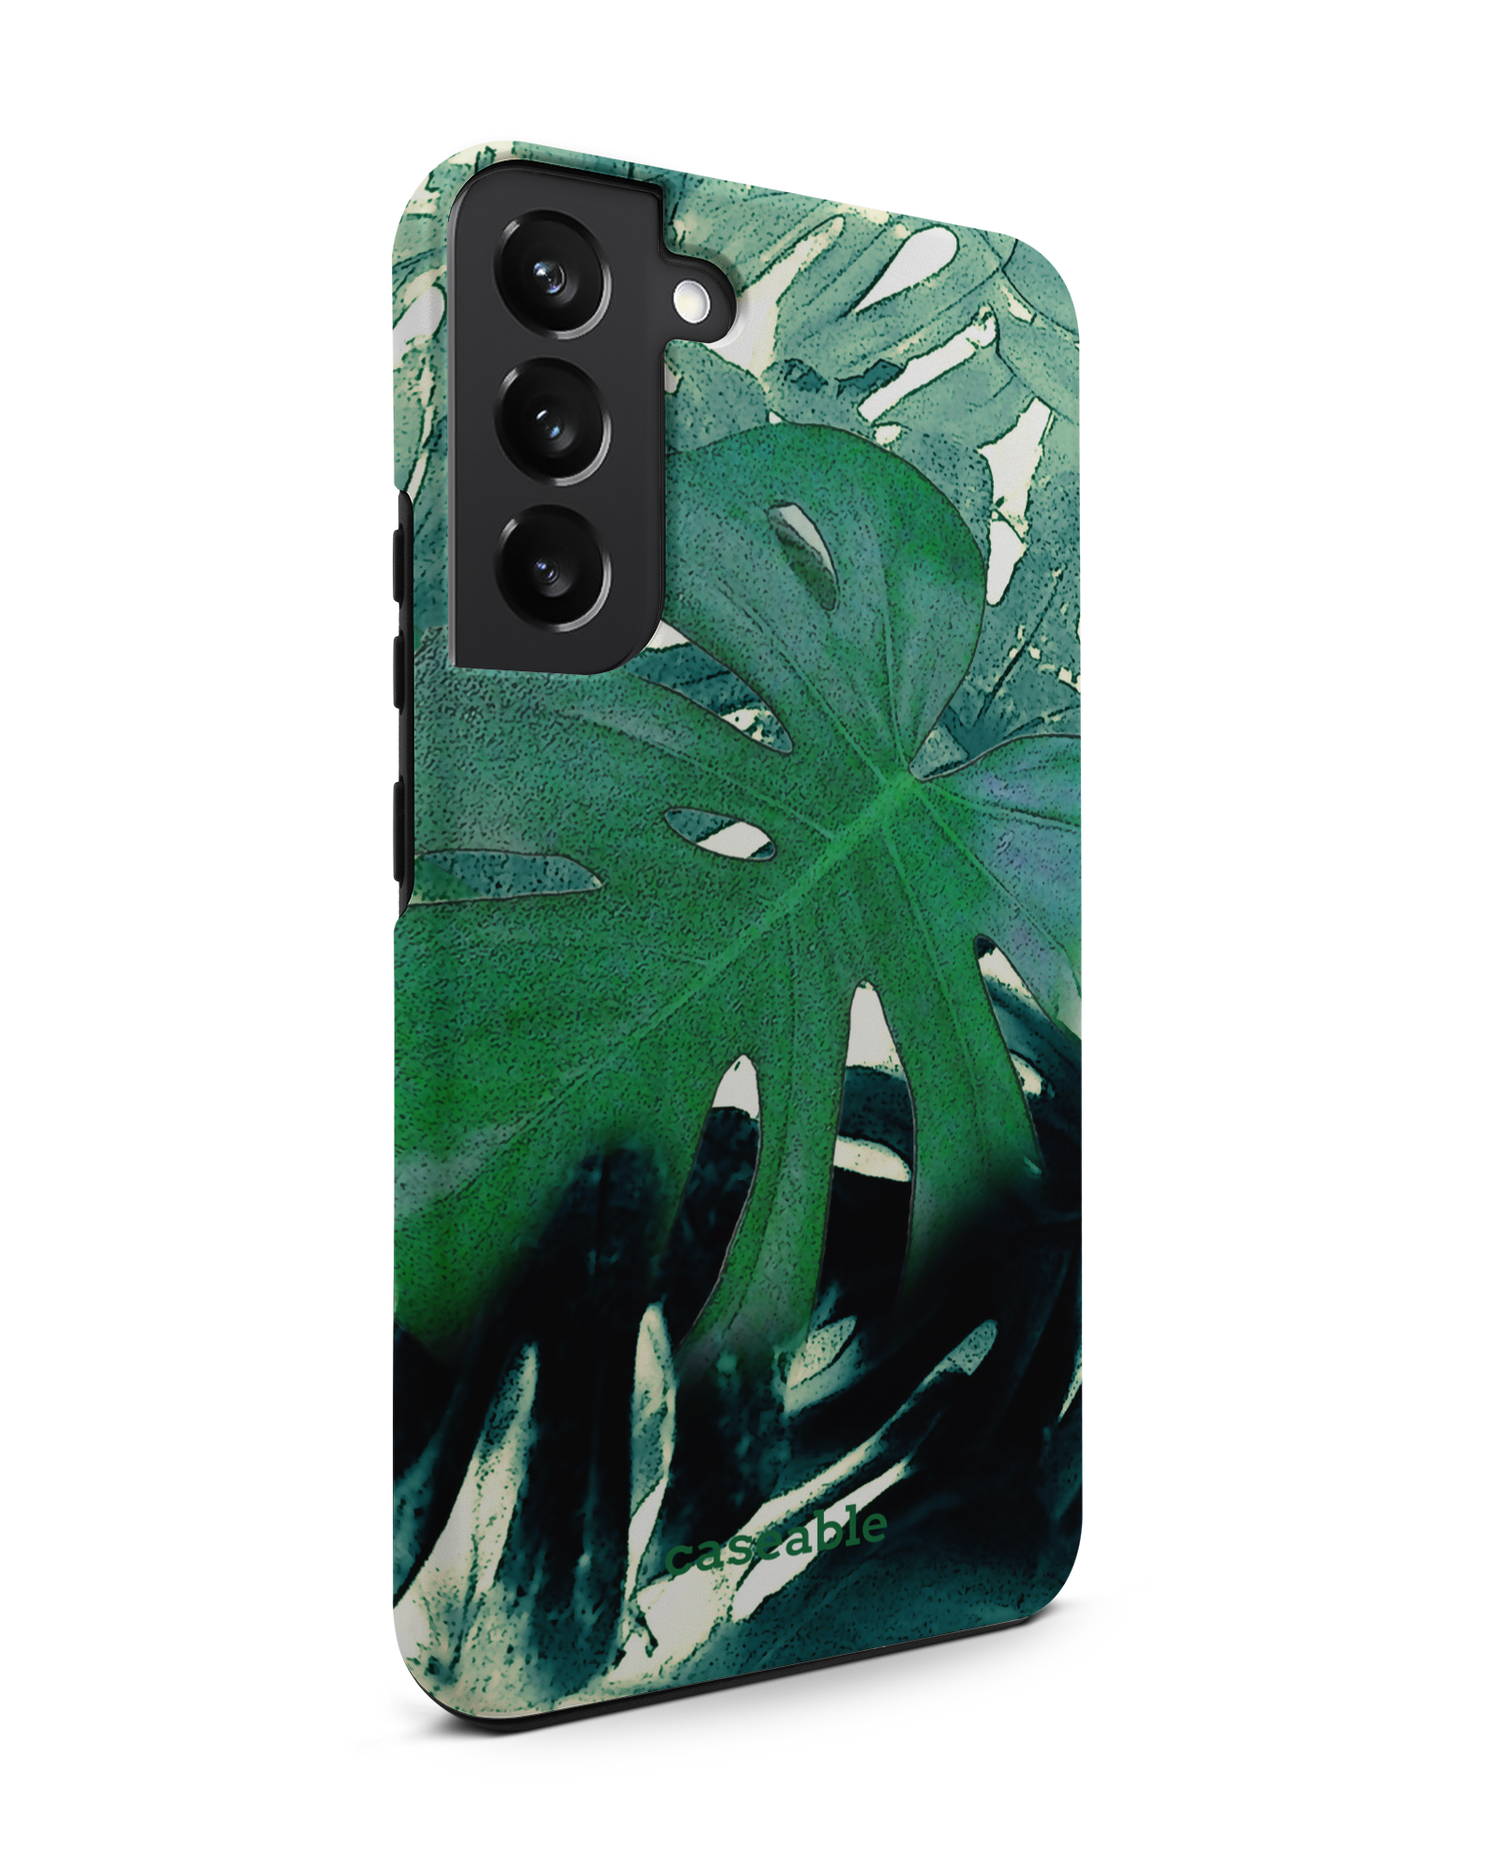 Saturated Plants Premium Phone Case Samsung Galaxy S22 Plus 5G: View from the left side